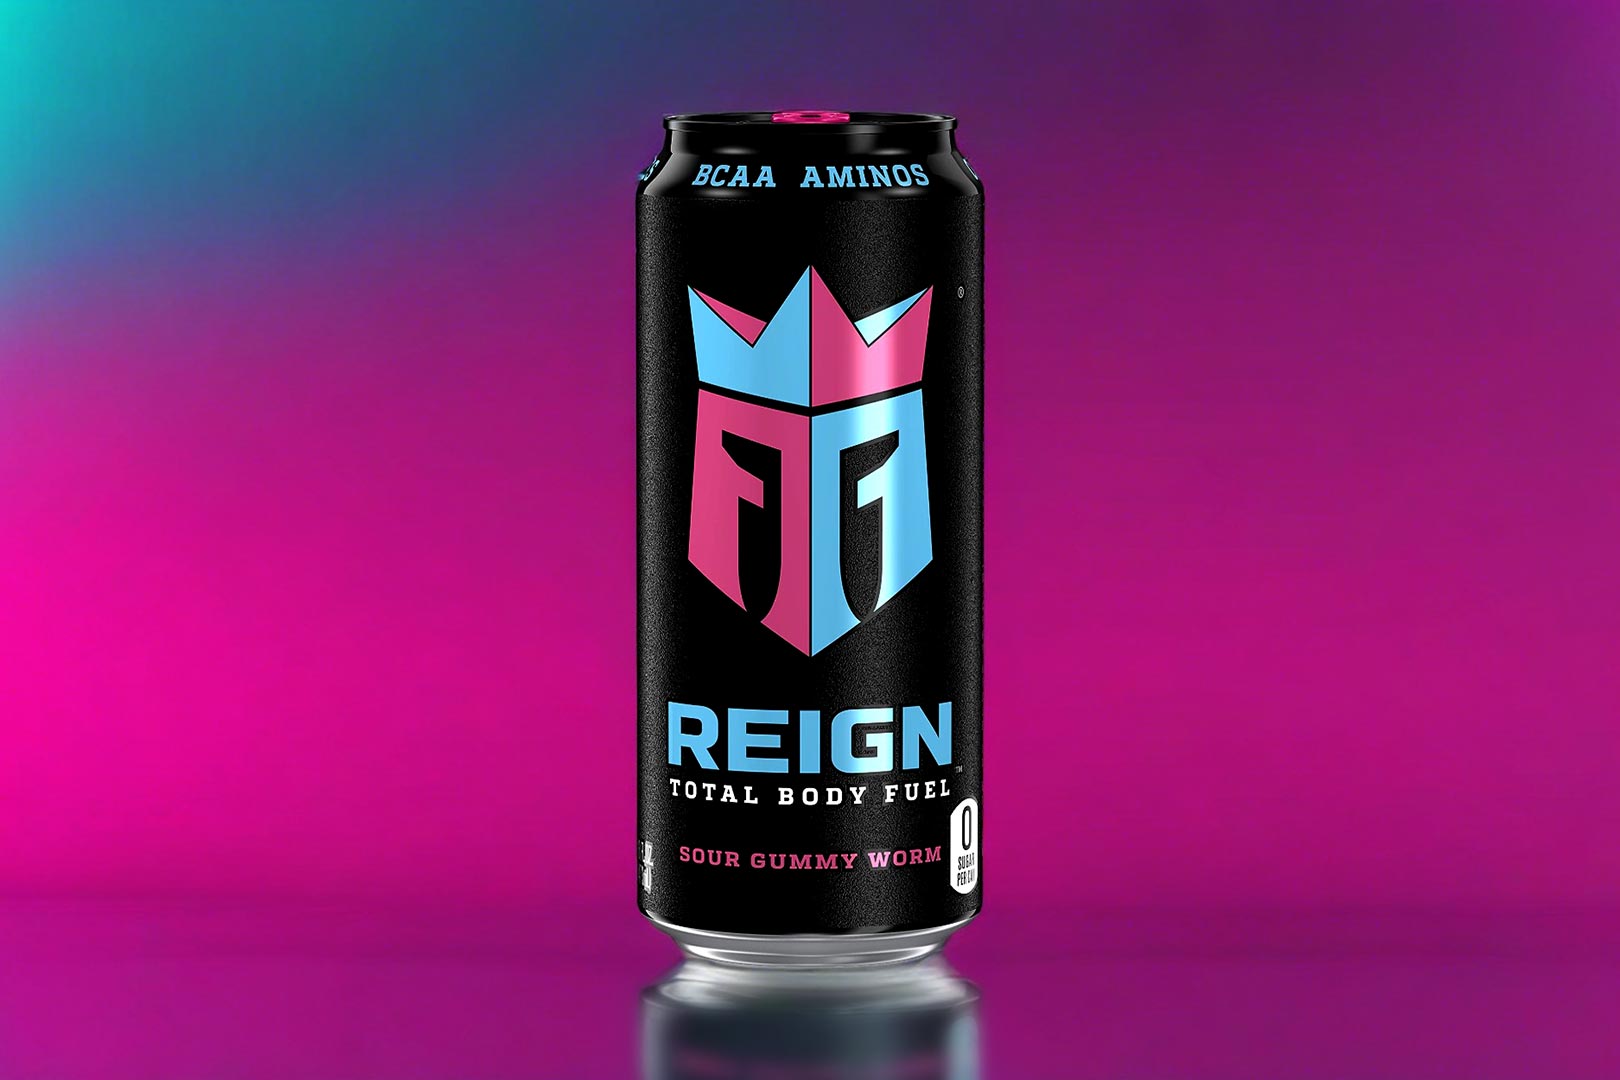 Where To Buy Sour Gummy Worm Reign Energy Drink